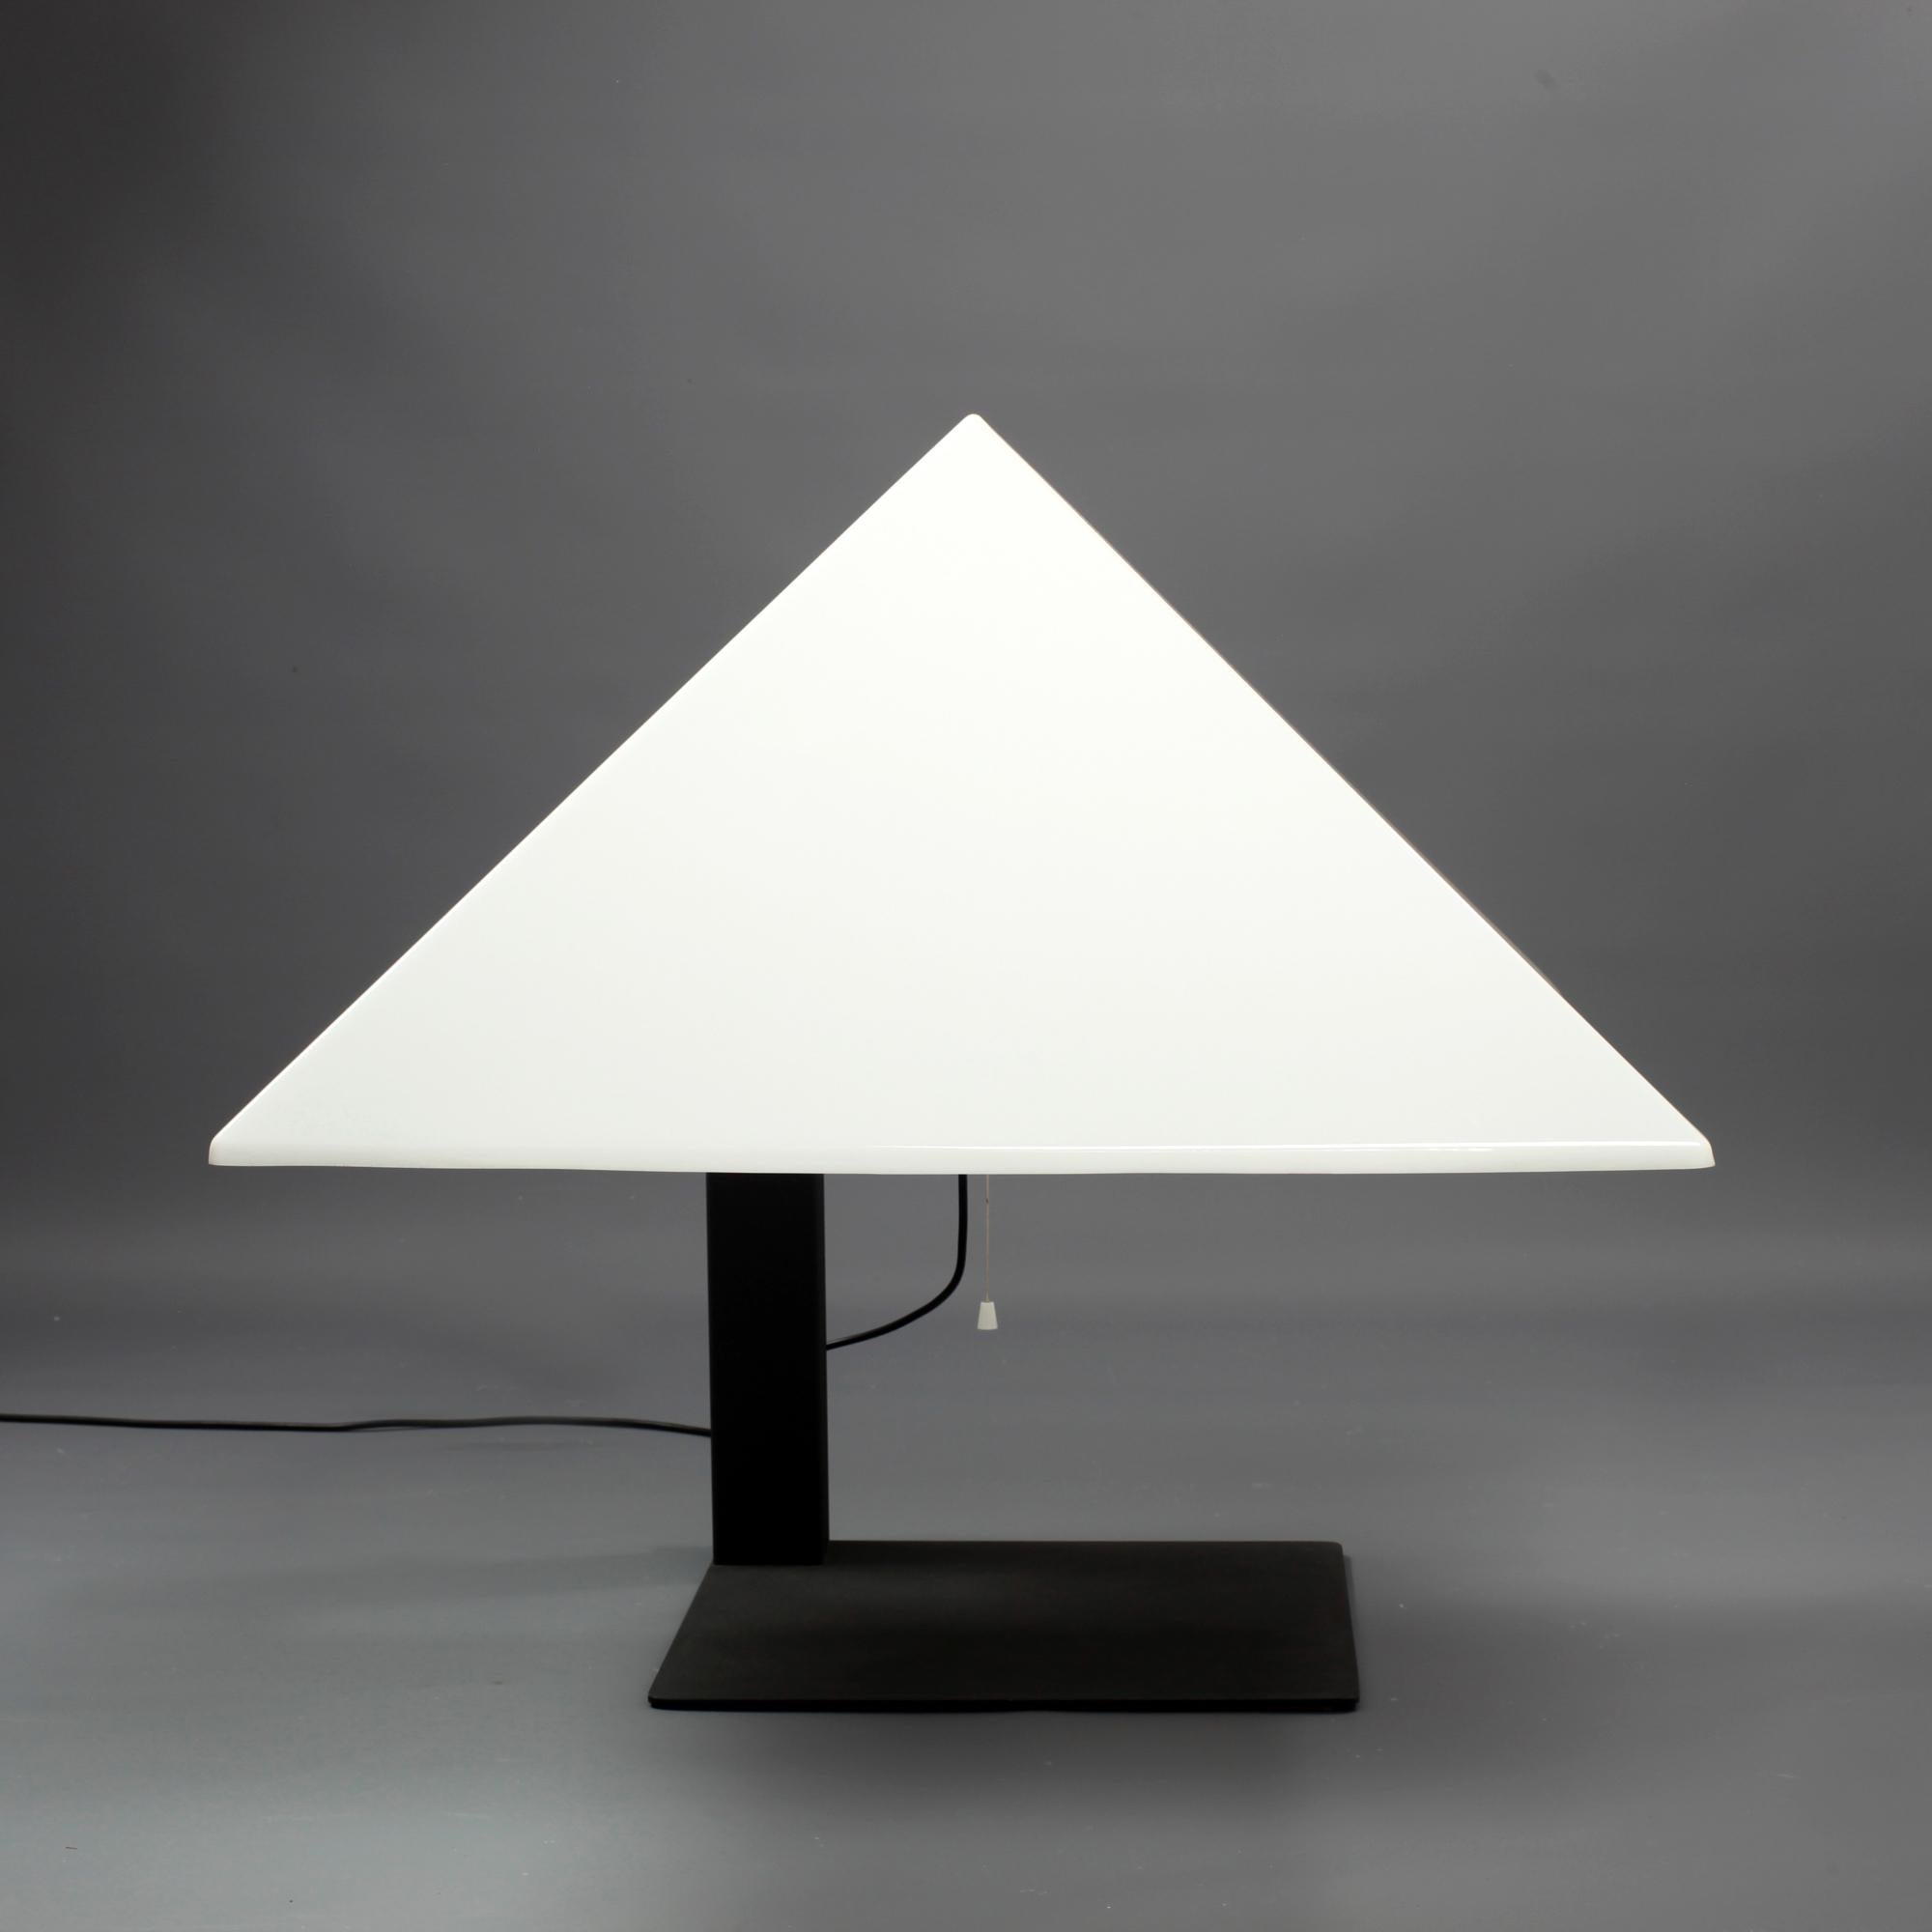 Large model 715 or “Pitagora” lamp designed by Elio Martinelli for Martinelli Luce, square base and foot in black lacquered metal with large pyramidal reflector in white ABS.
This model in very good condition is no longer produced and is rarely